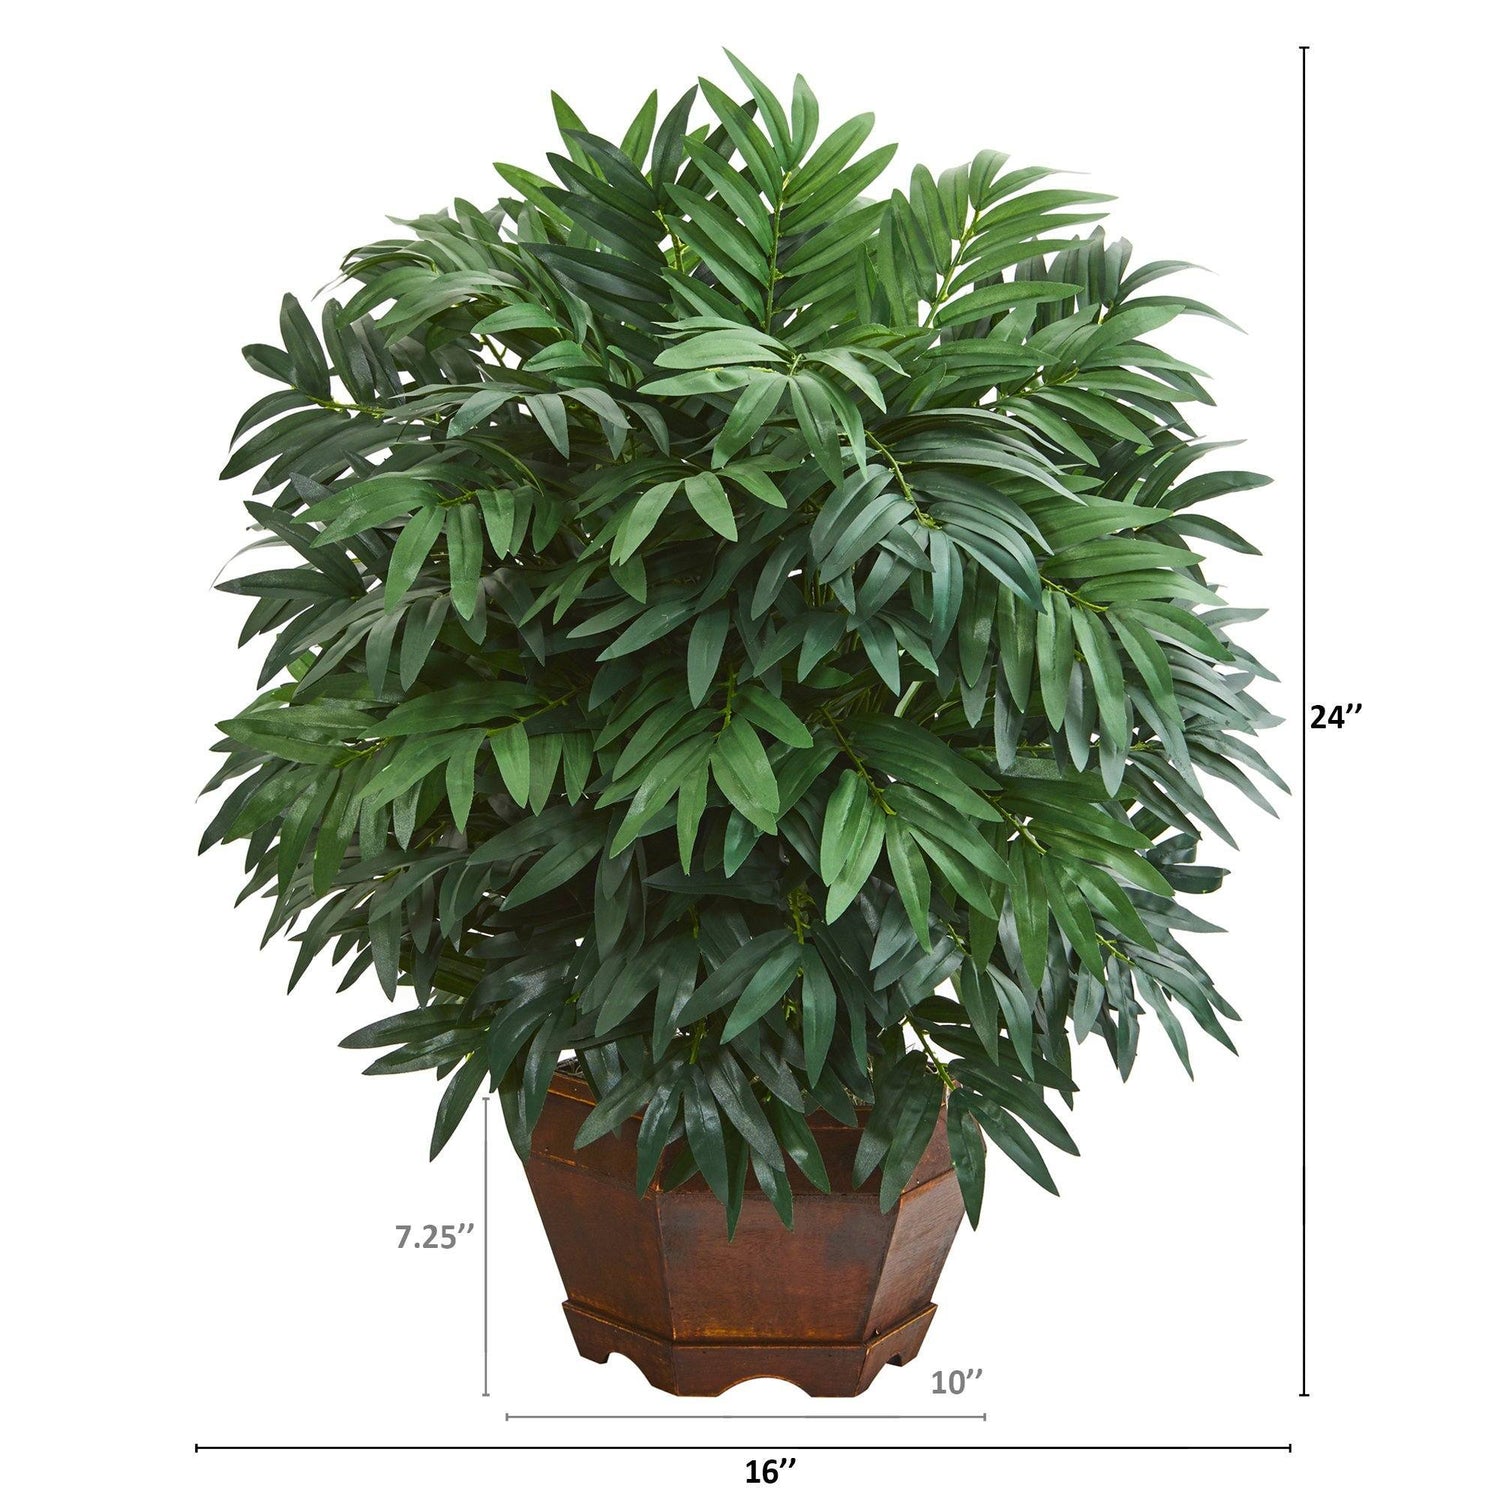 24” Bamboo Palm Artificial Plant in Decorative Planter